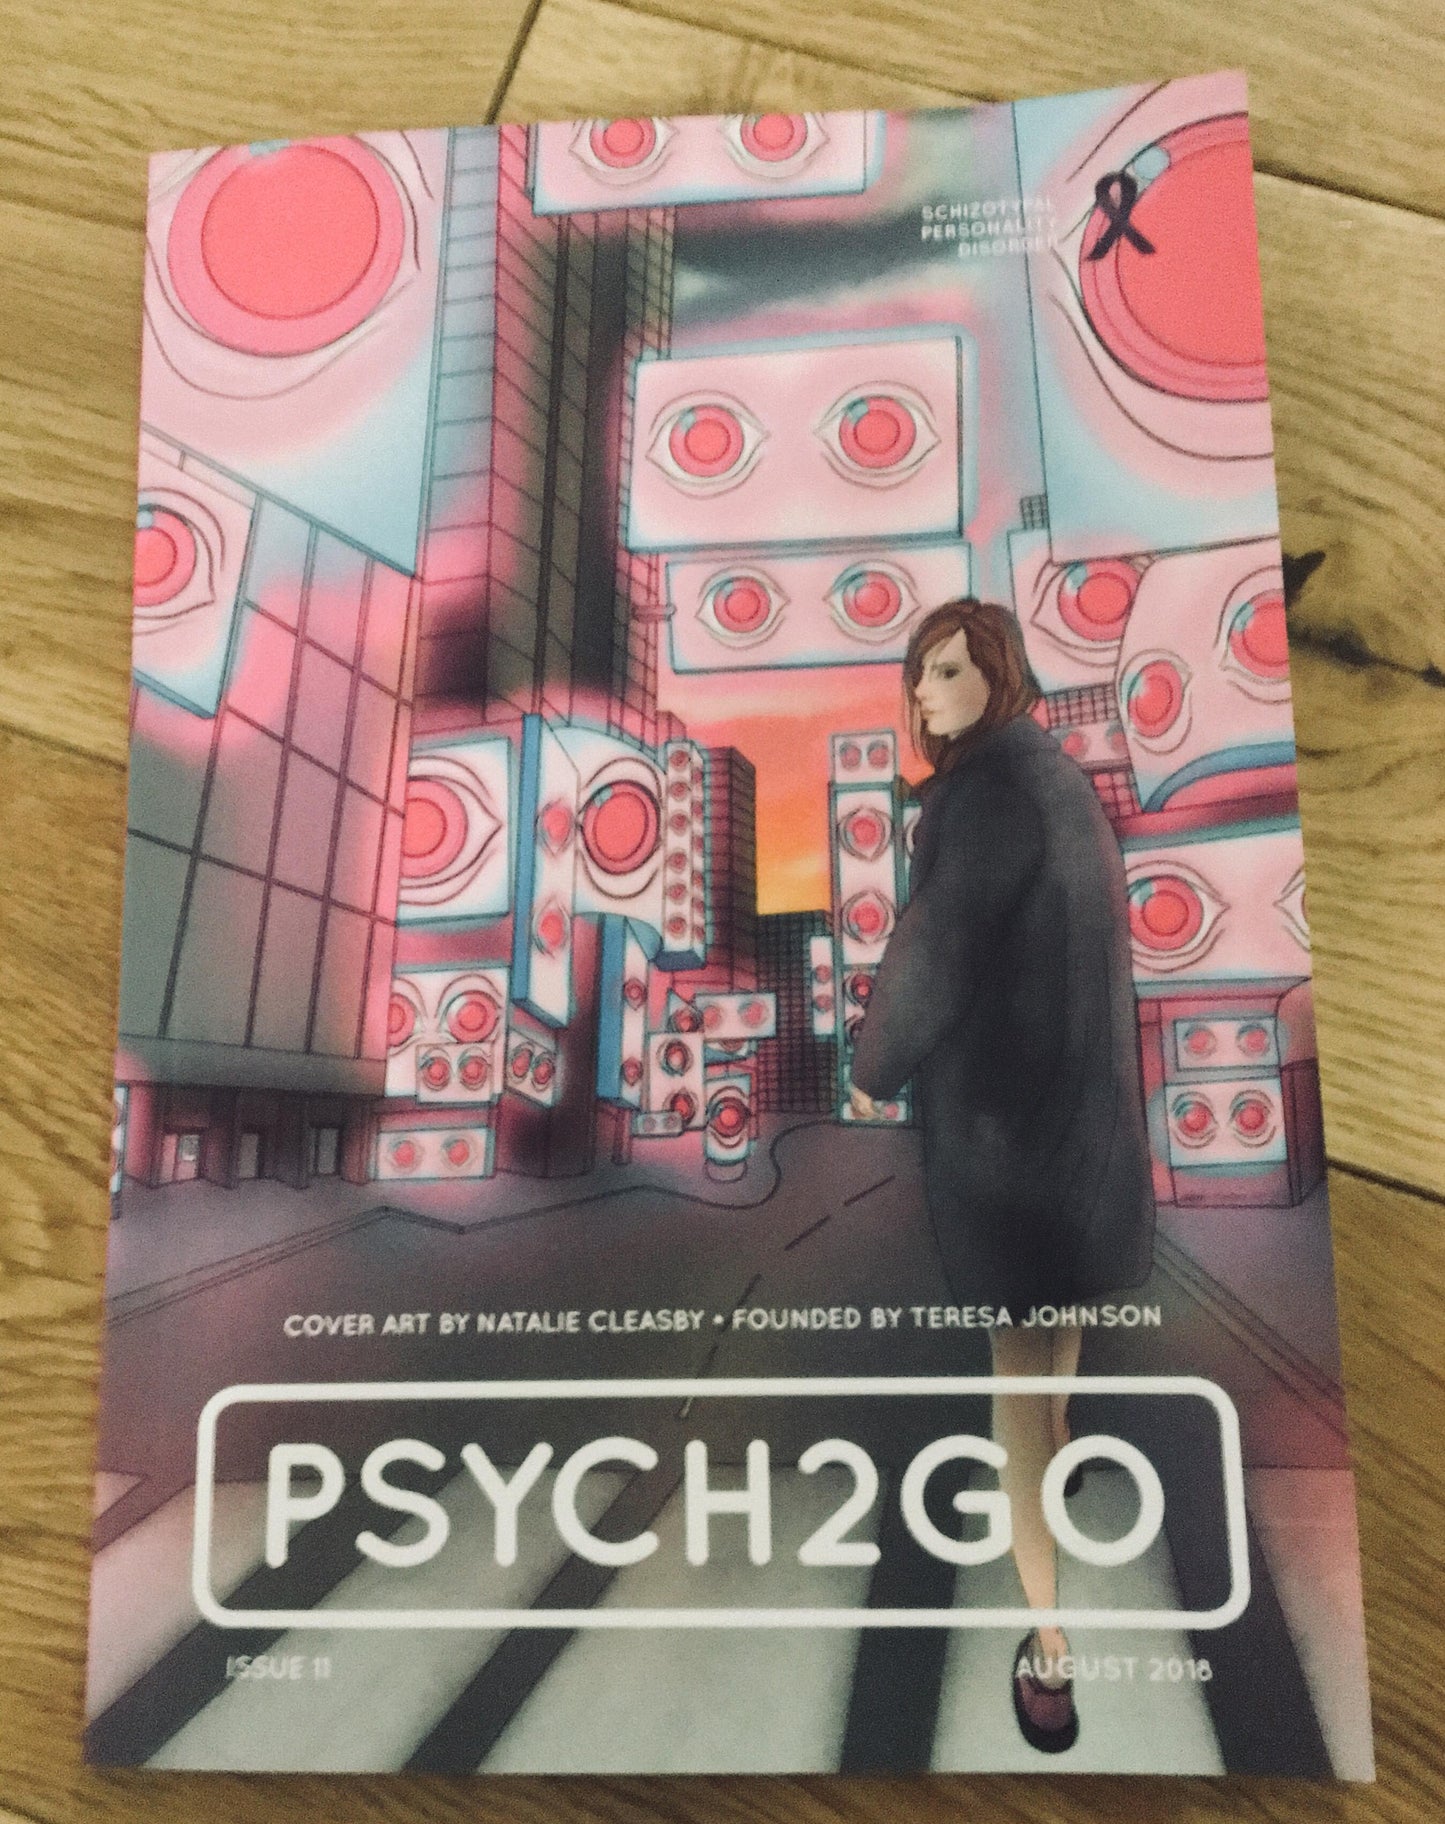 Psych2Go Magazine #11 - Schizotypal Personality disorder (Physical)